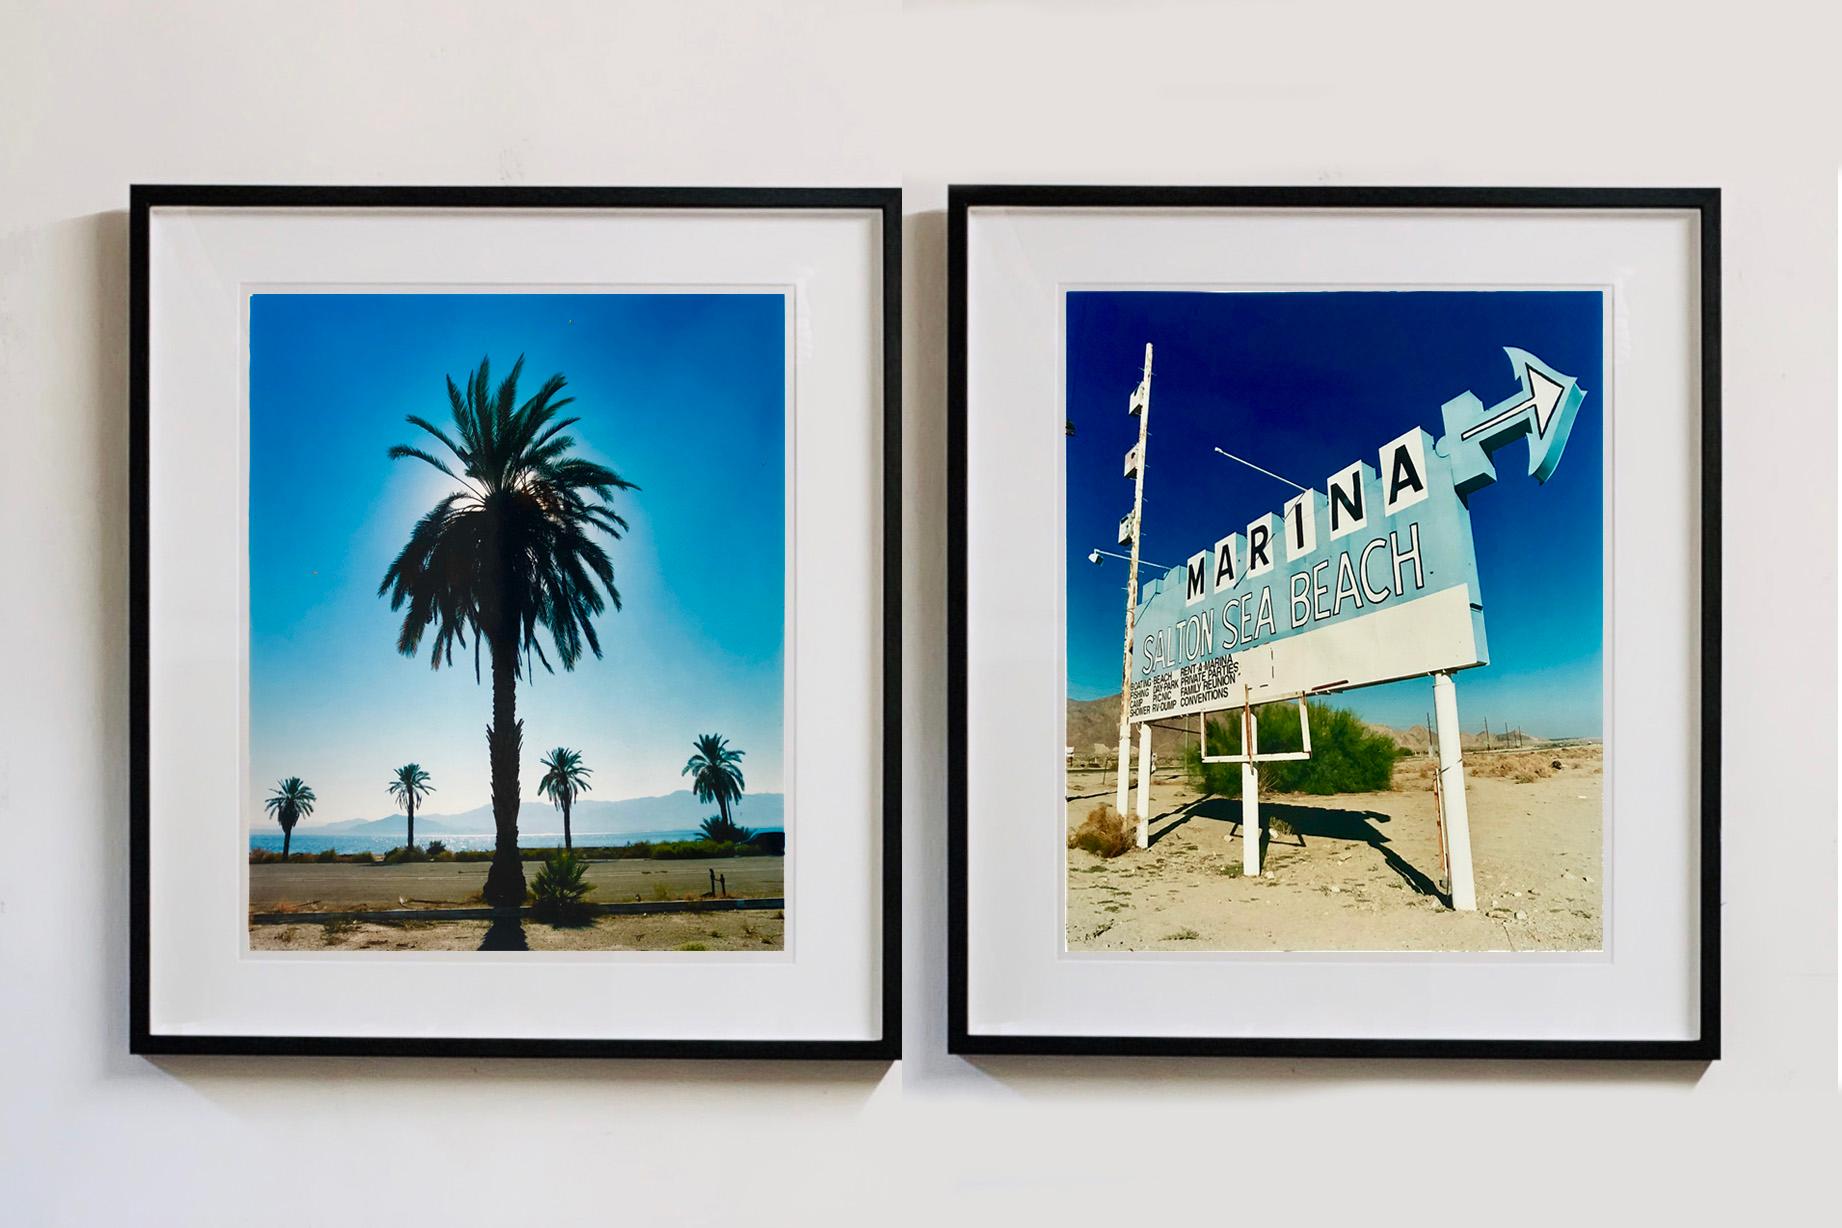 Palm Tree from Richard Heeps photography series Salton Sea. 
You can feel the heat in this classic Palm Tree Print, the almost silhouette of the Palm Tree against the saturated blue sky takes you to a hot sultry day.

This artwork is a limited